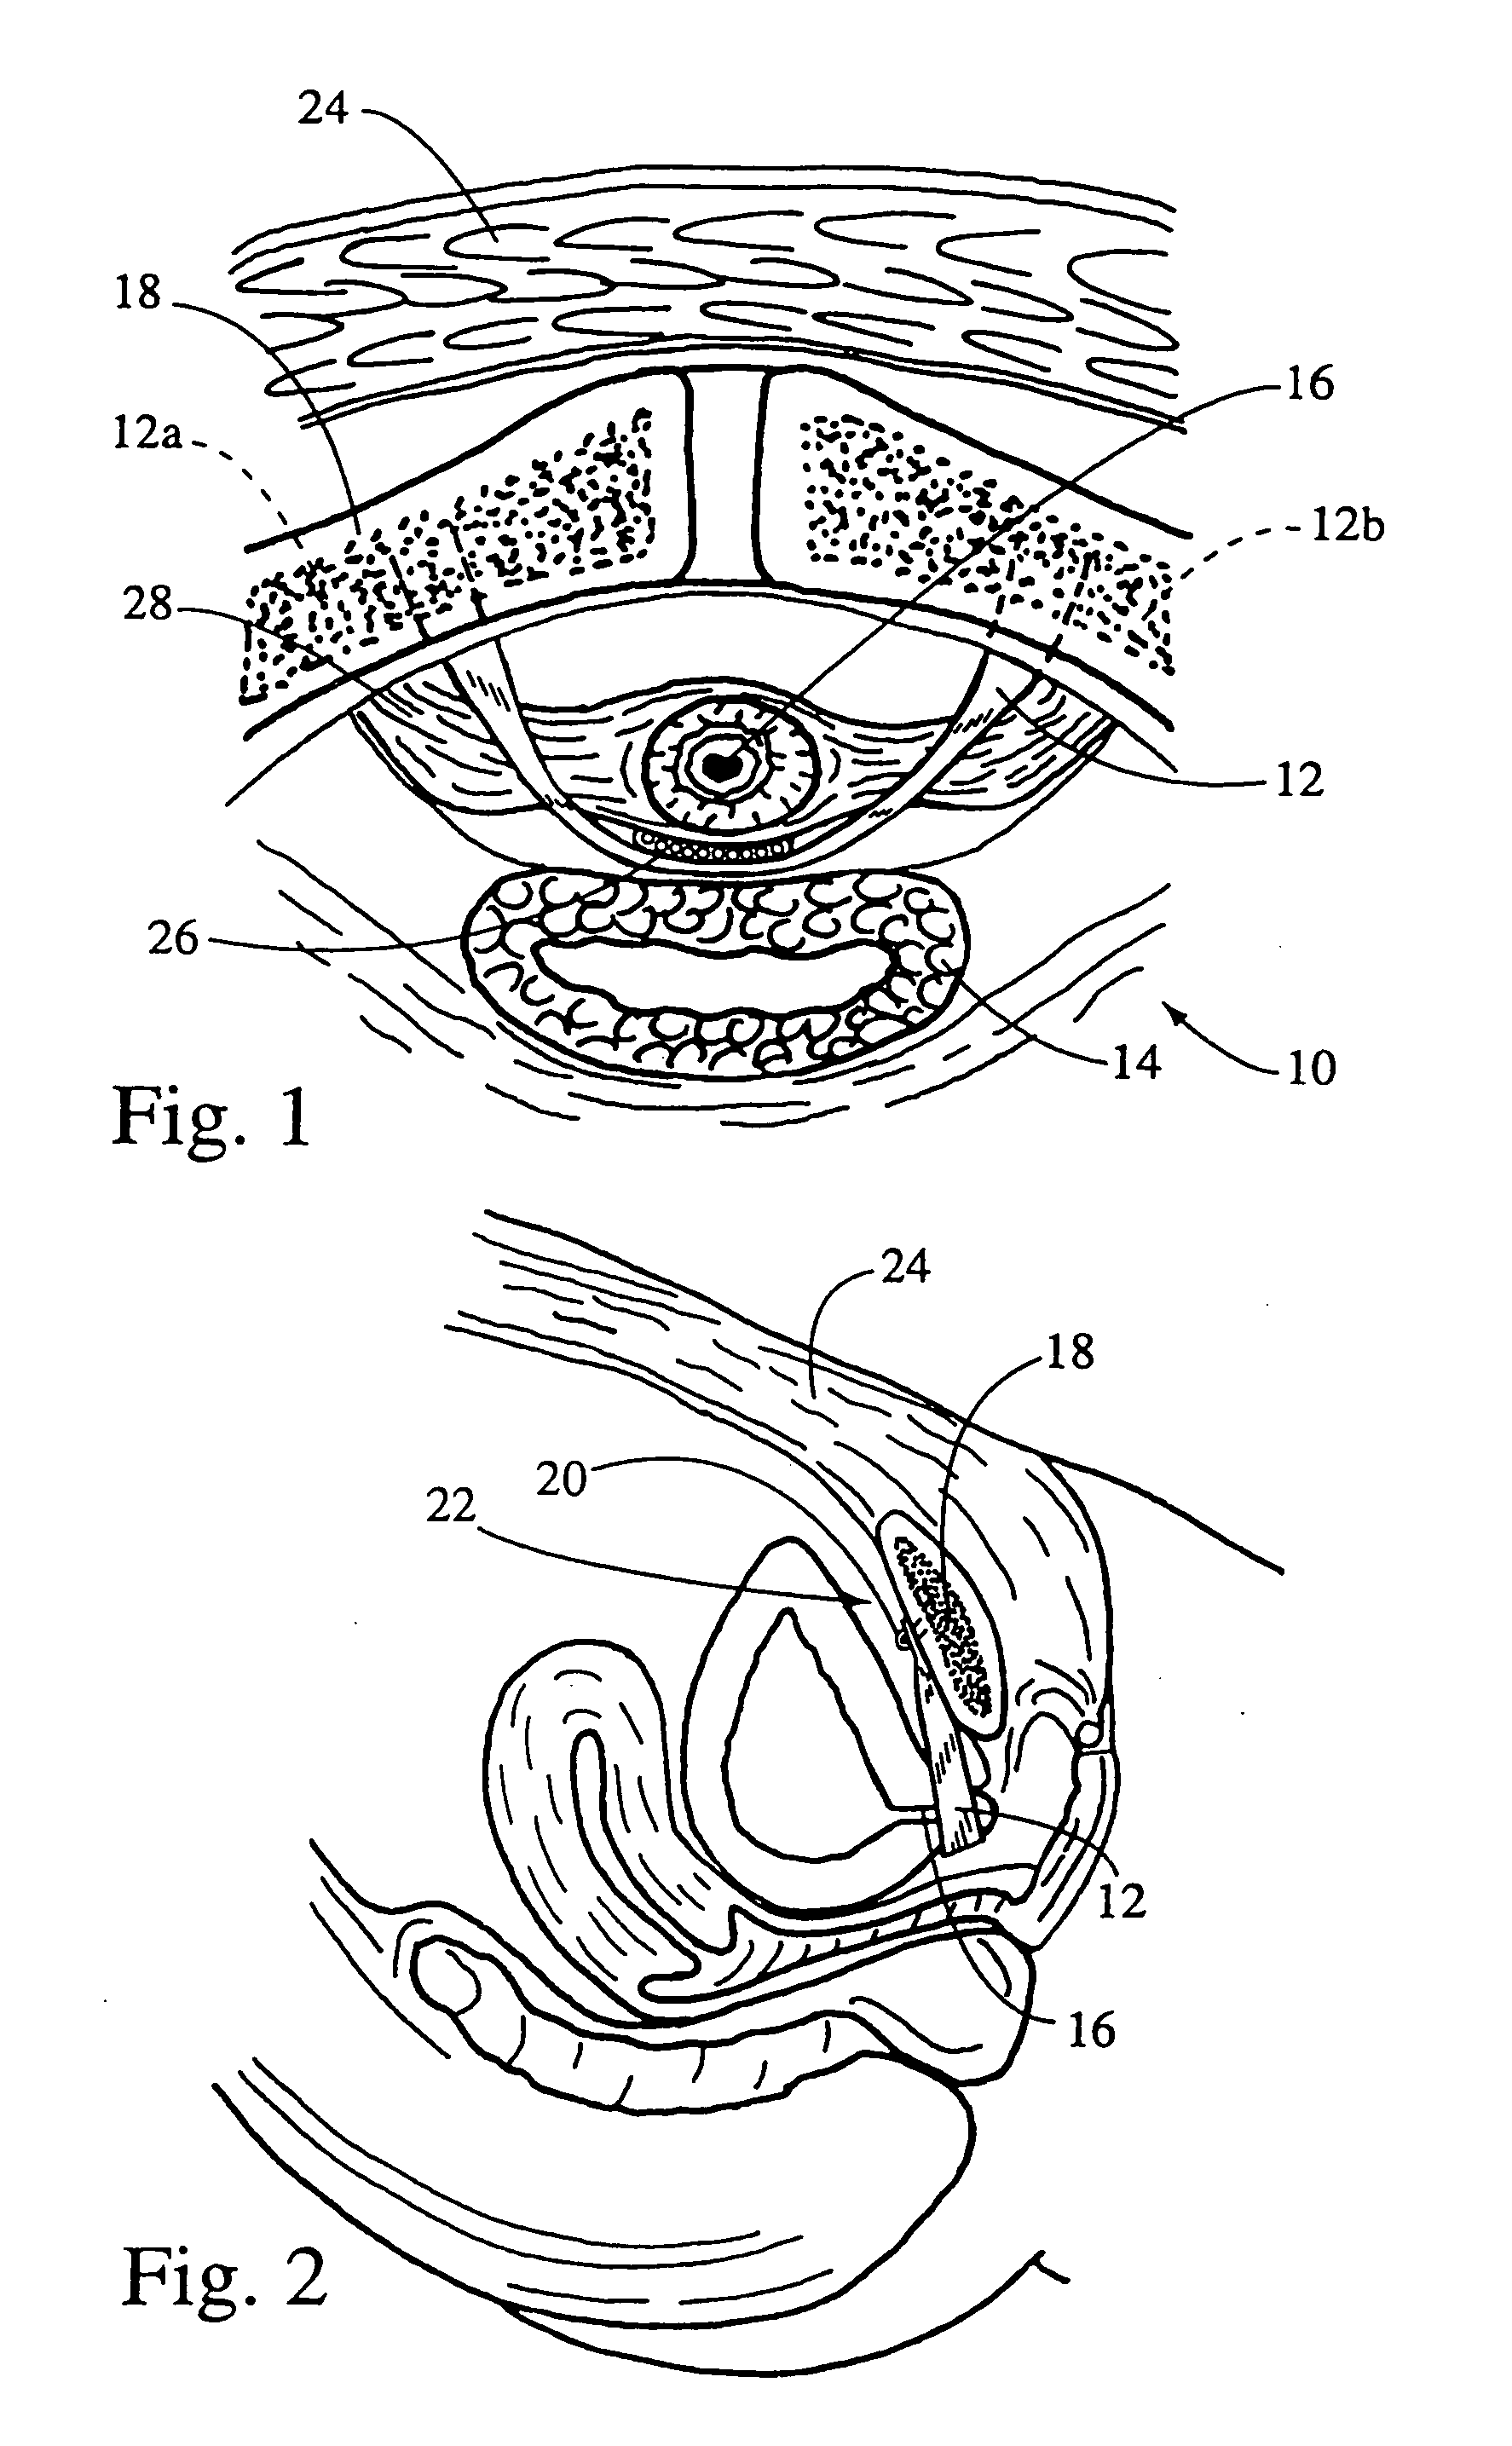 System and method for securing implants to soft tissue